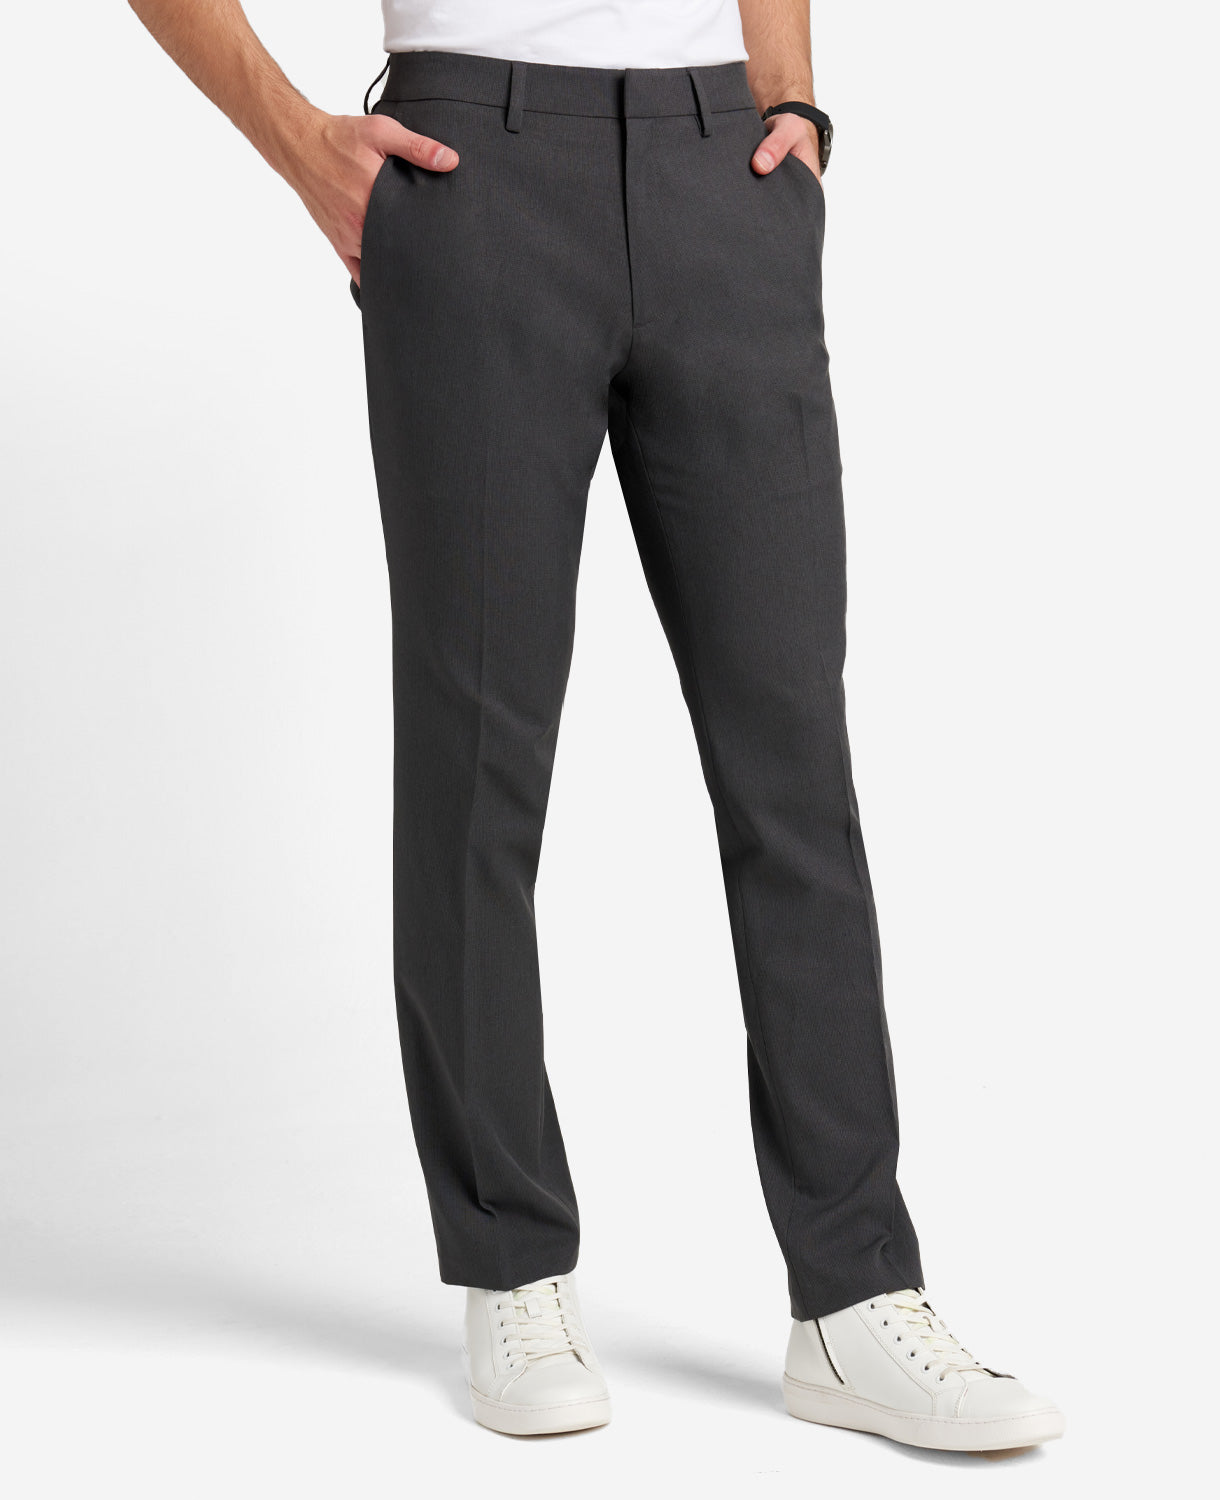 Stretch Micro Check Modern-Fit TECHNI-COLE Dress Pant | Kenneth Cole